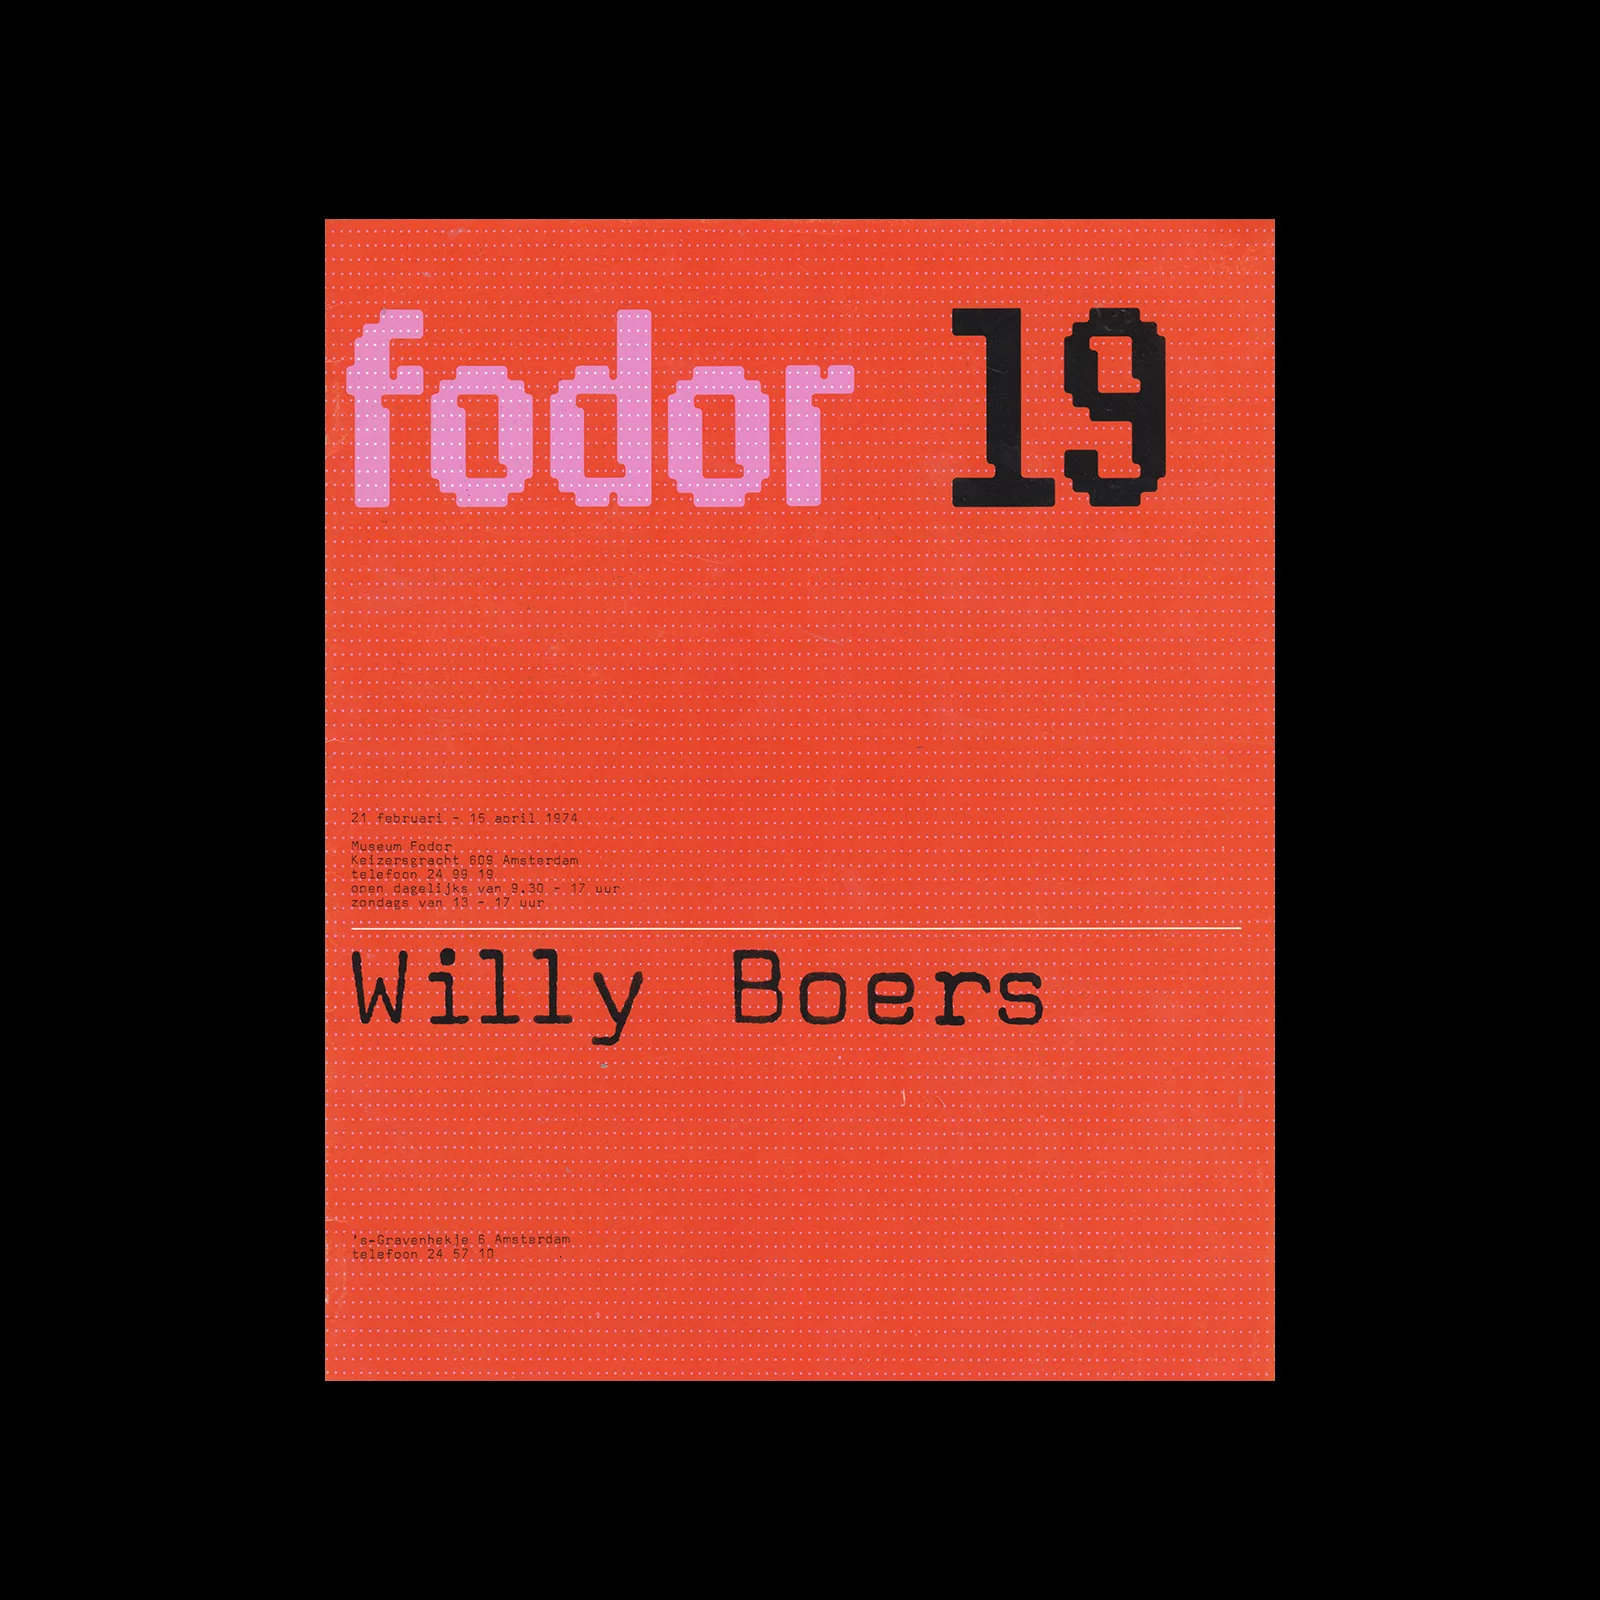 Fodor 19, 1974 - Willy Boers. designed by Wim Crouwel and Daphne Duijvelshoff (Total Design)